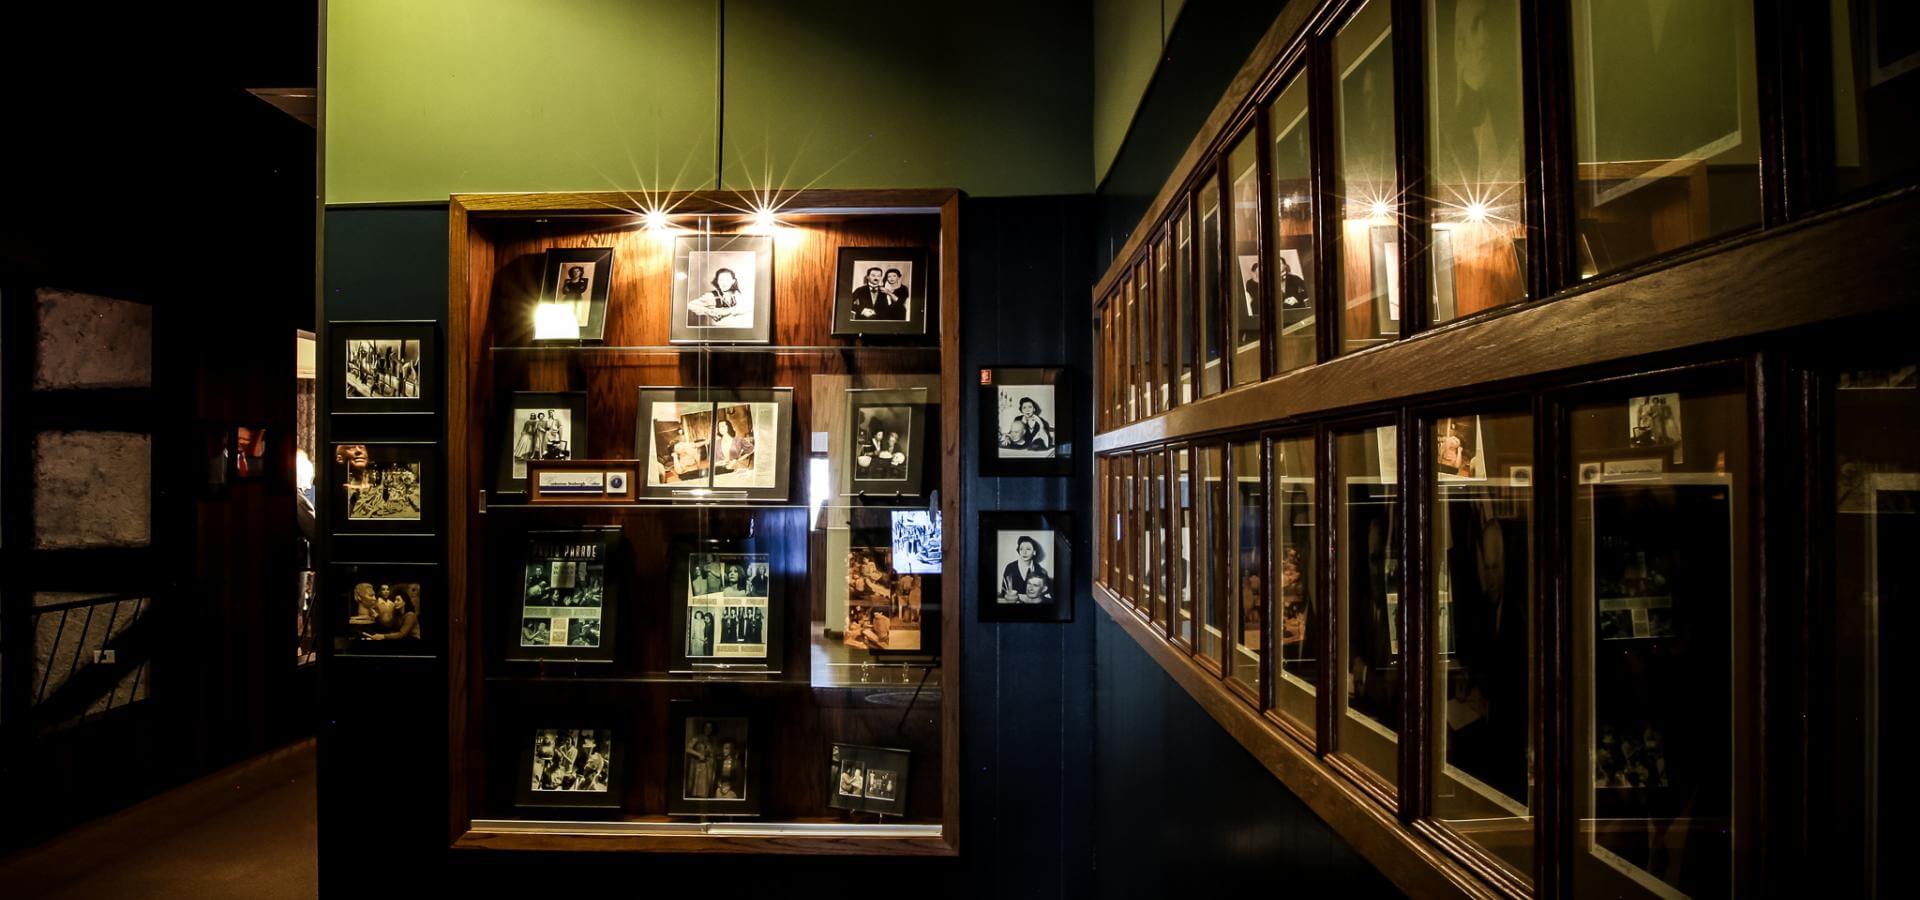 The photo gallery exhibit within The National Presidential Wax Museum depicting the lives of American Presidents as well as their families, pets and acquaintances. 